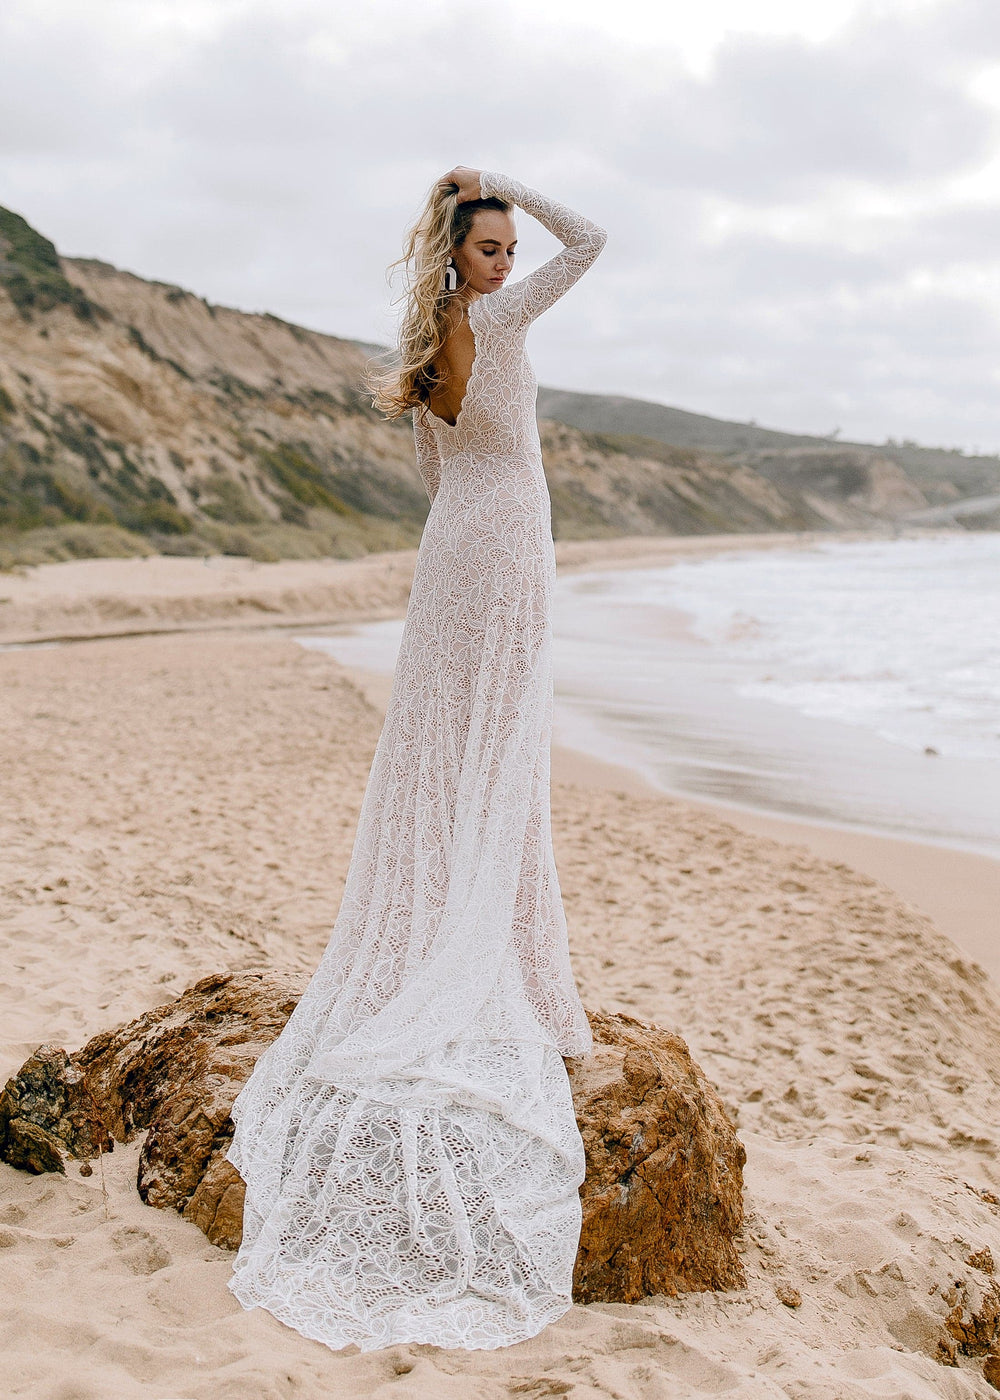 WearYourLove - Wedding Dresses for Free-Spirited Brides – Tagged 